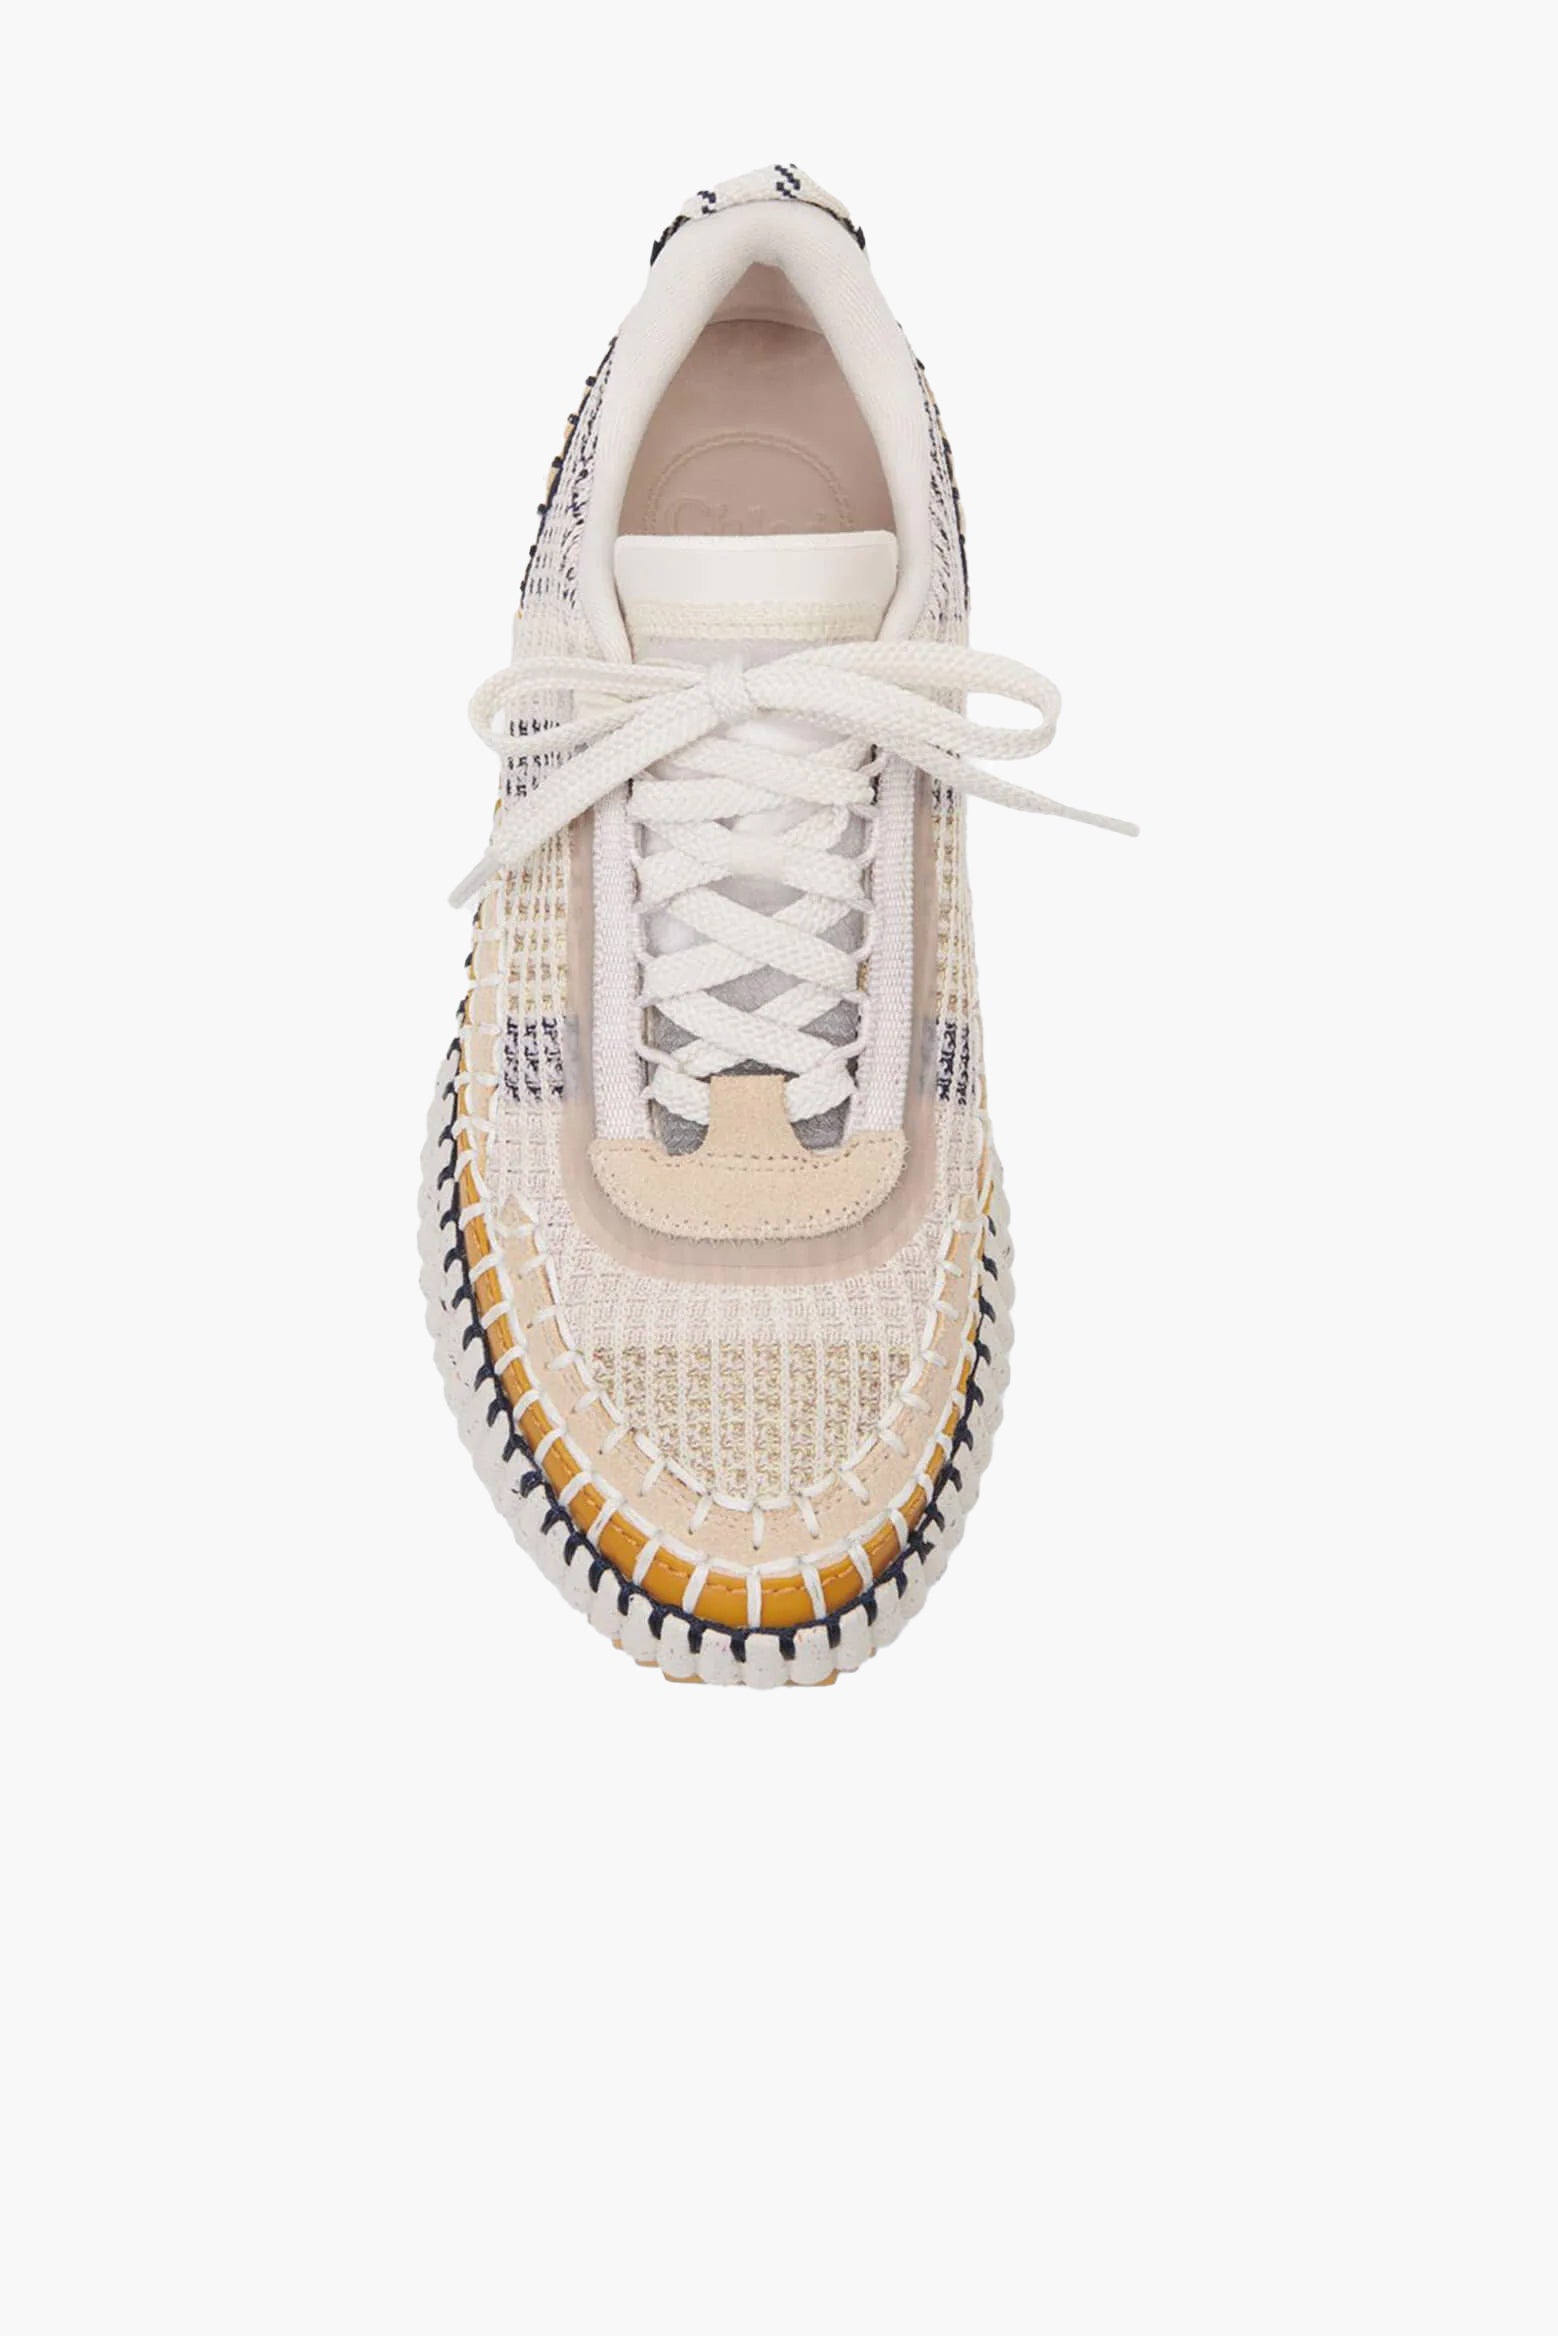 Chloe Nama Sneakers in Biscotti Beige from The New Trend